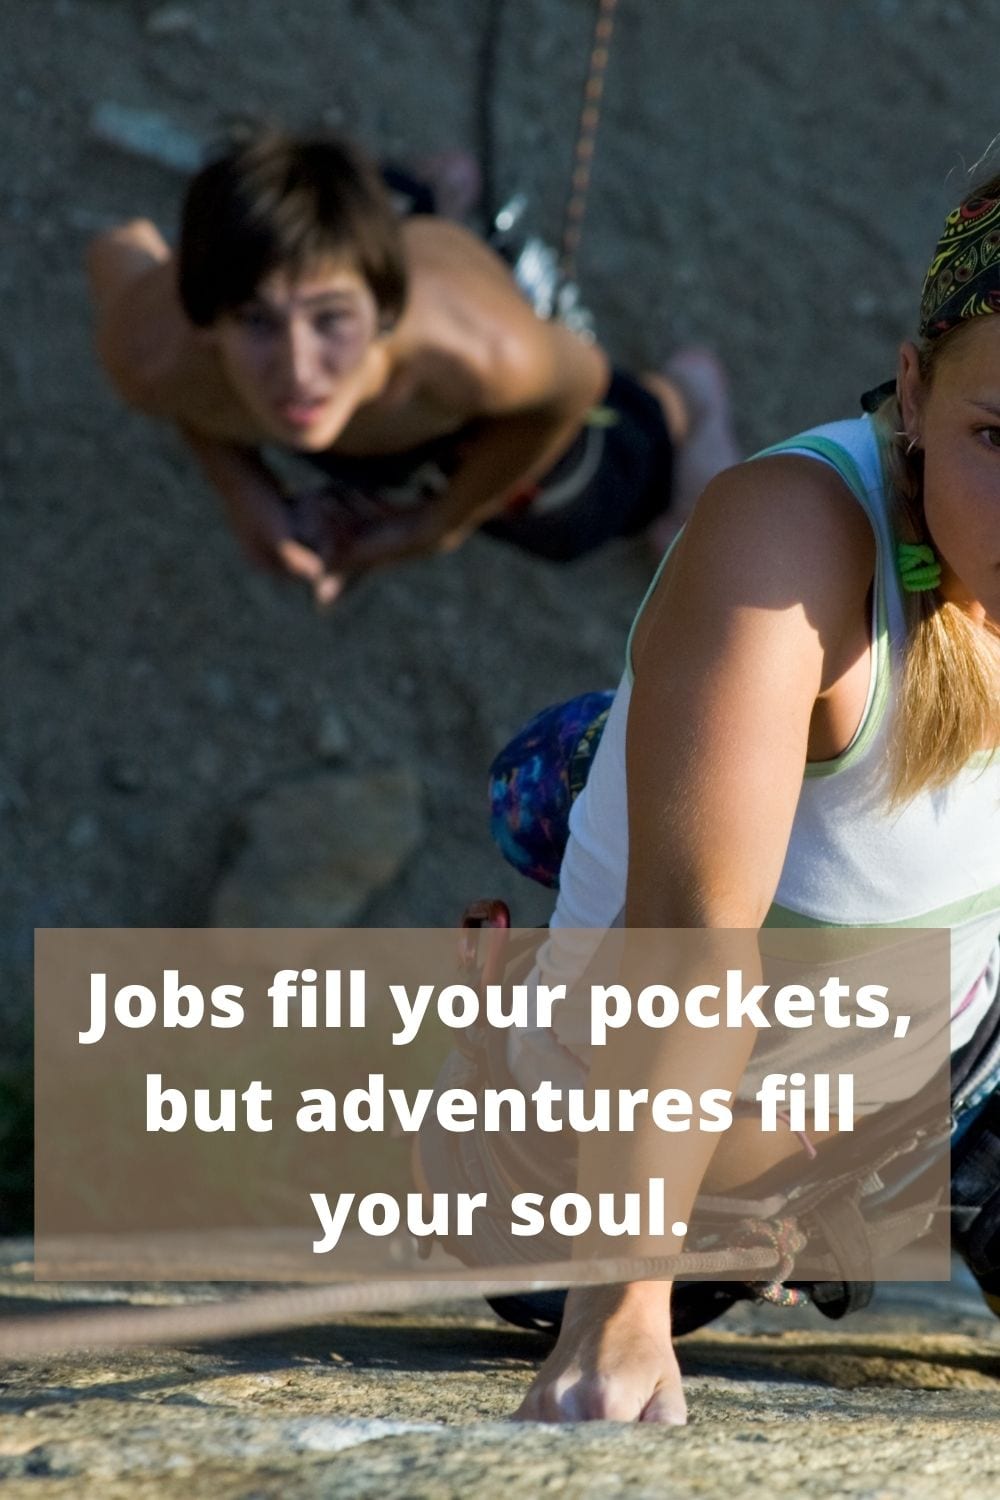 Jobs fill your pockets, but adventures fill your soul. - Jaime Lyn Beatty